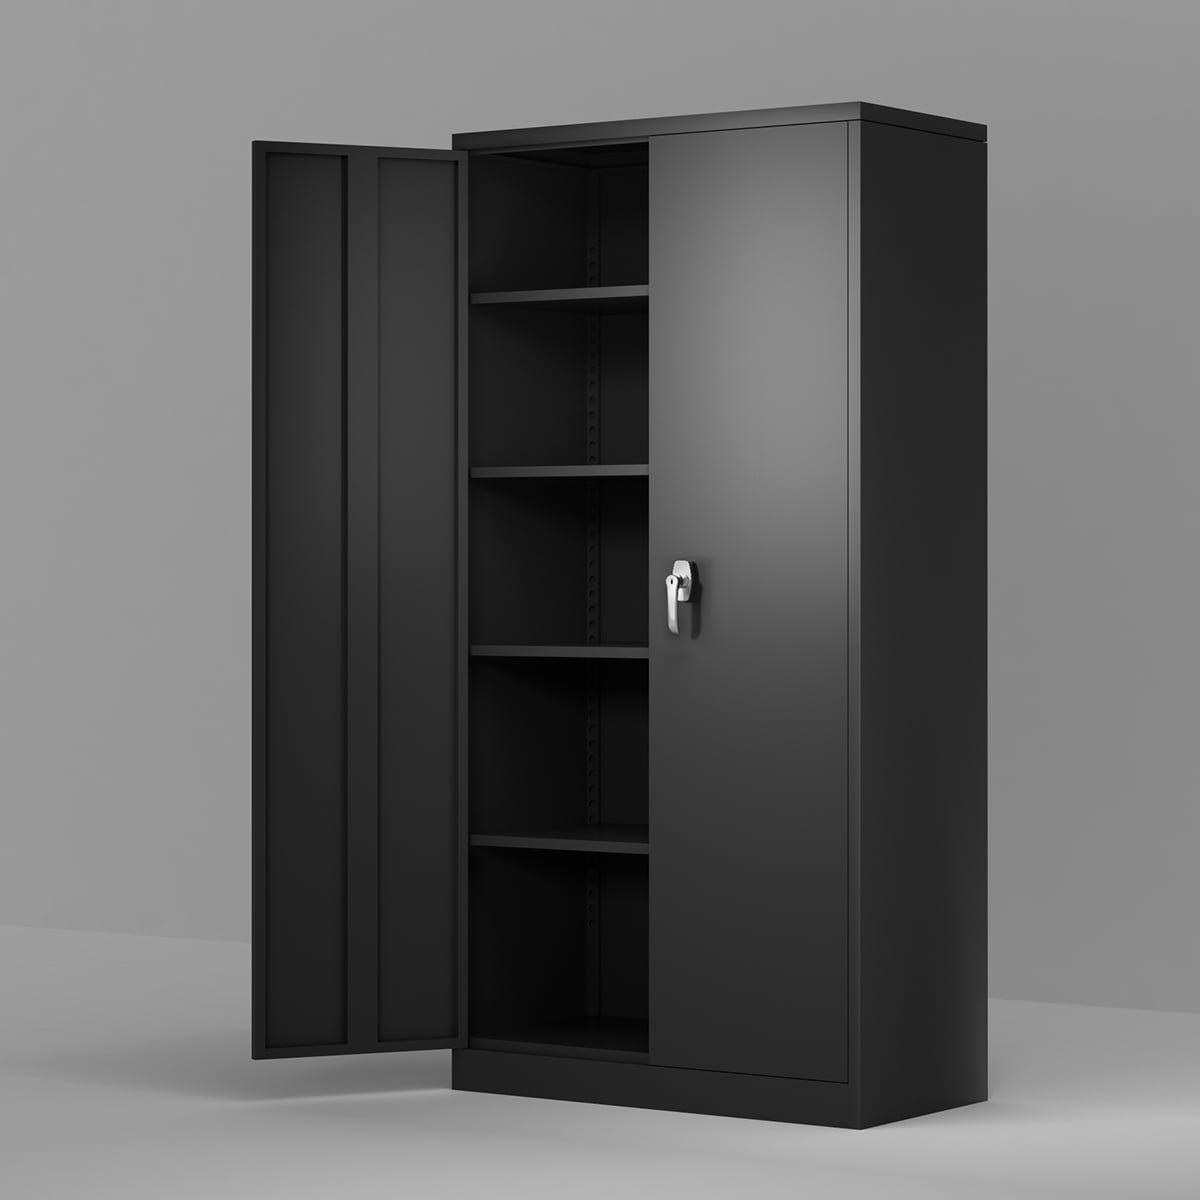 Details about   LS22 Steel Locker Storage with 2 Tiers 2 Key Air Holes Doors Light Gray Color 